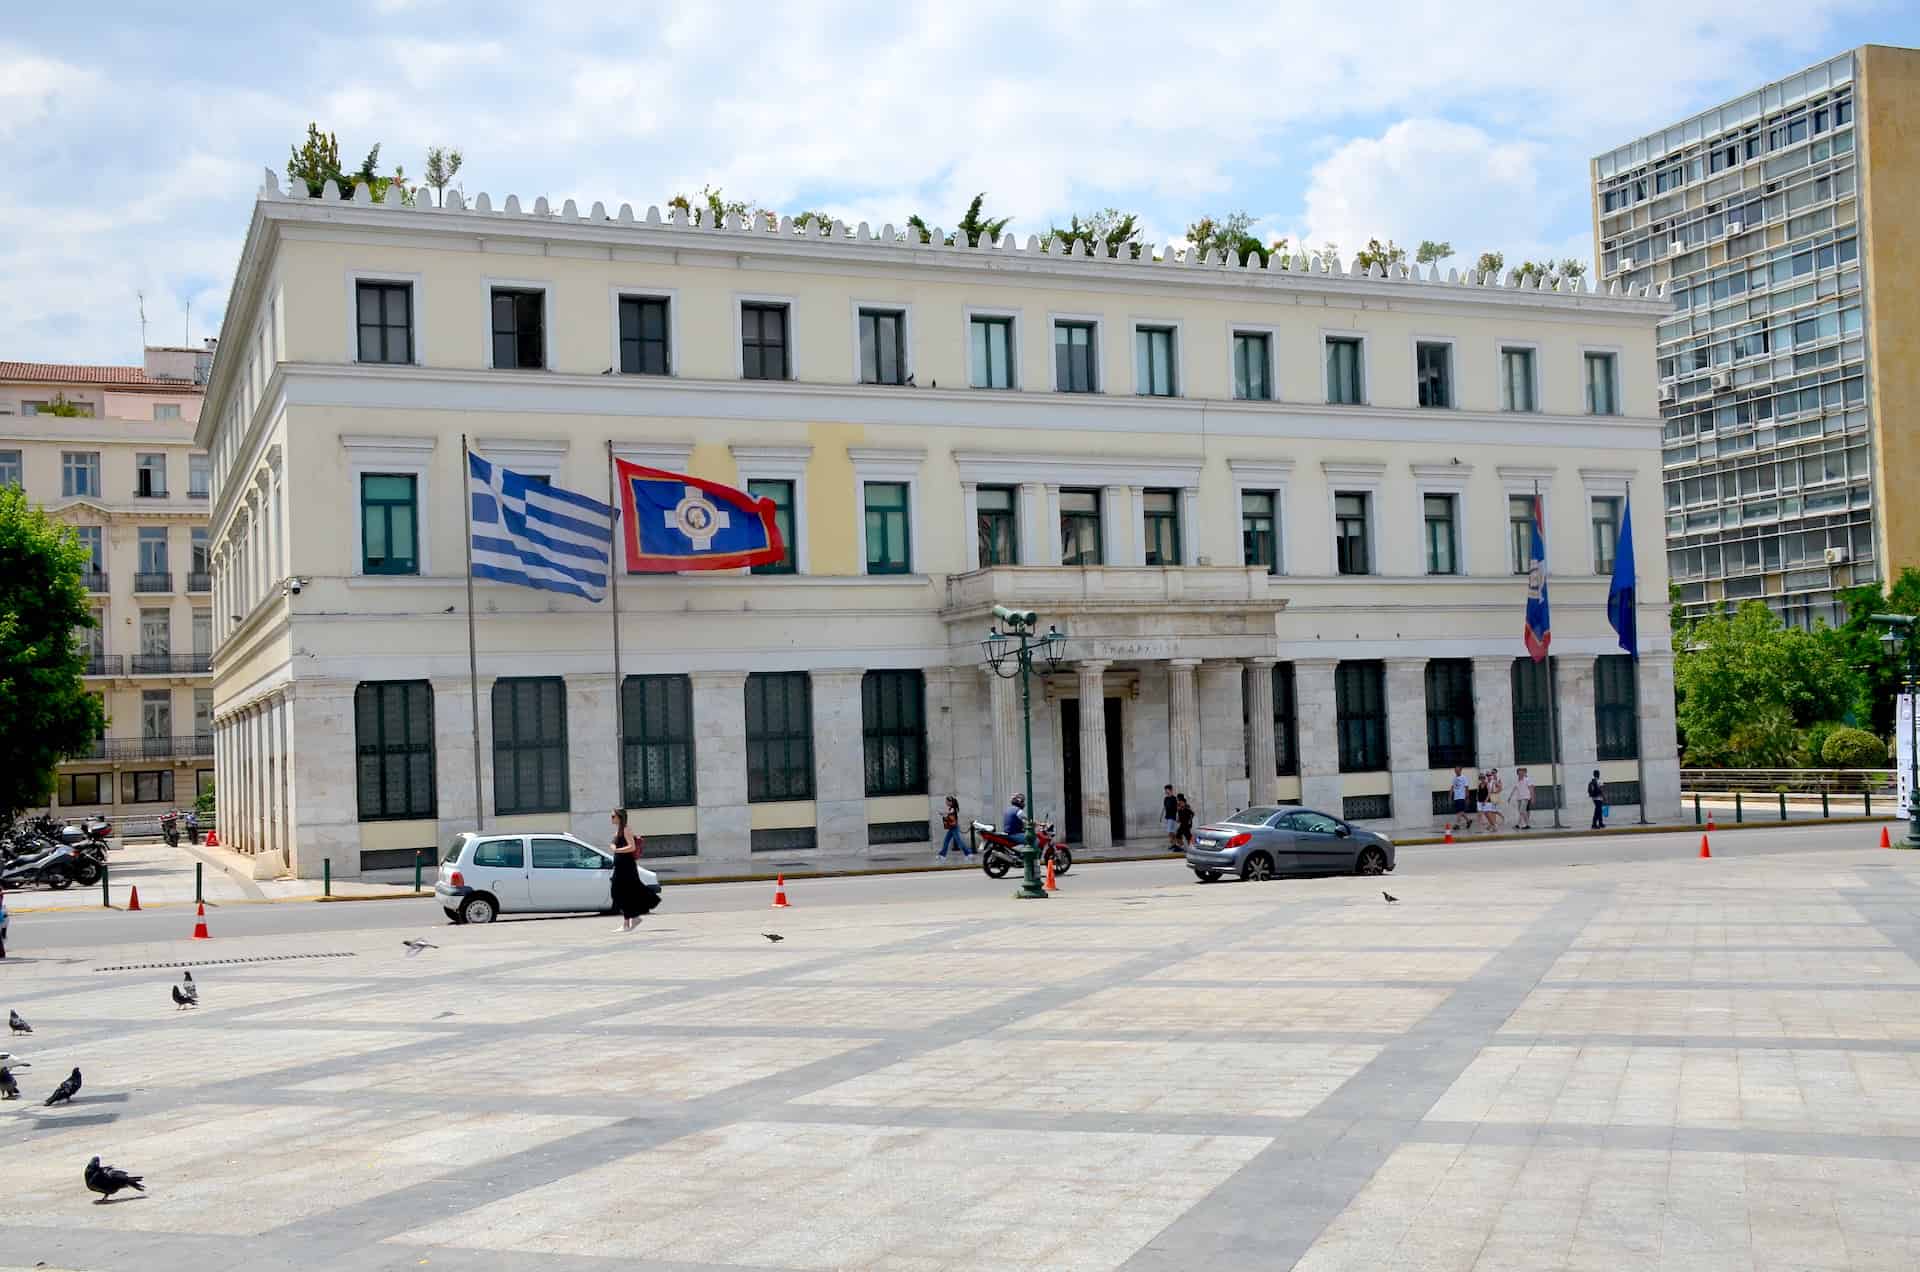 Athens City Hall at Kotzia Square in Athens, Greece